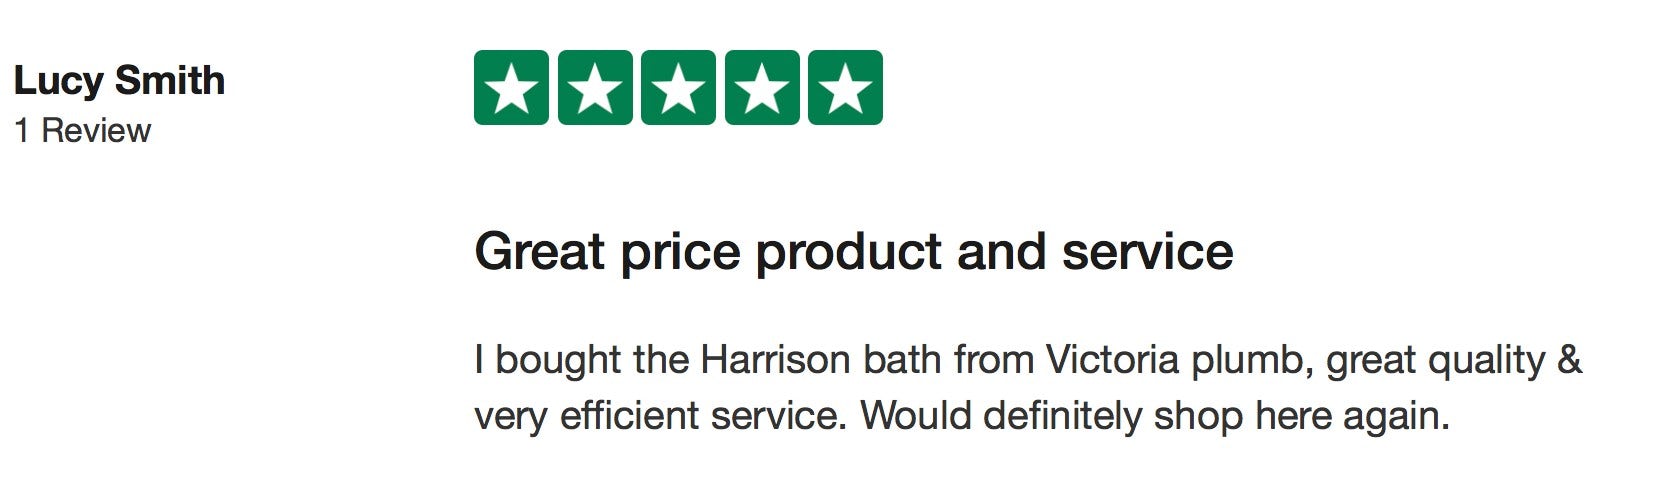 Lucy Smith Trustpilot review